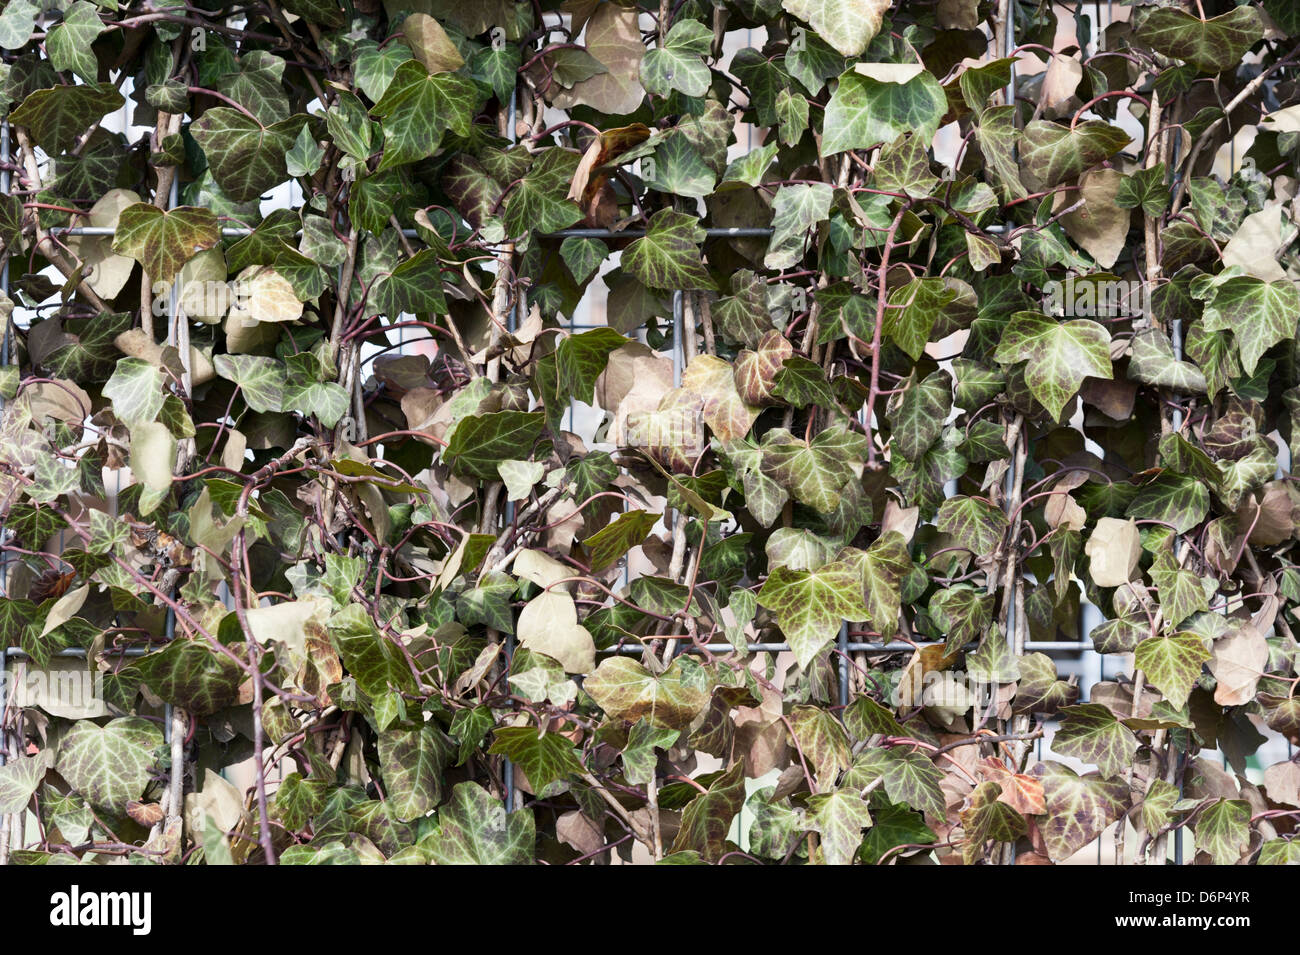 An Ivy fence growing on a wire frame panel. Stock Photo